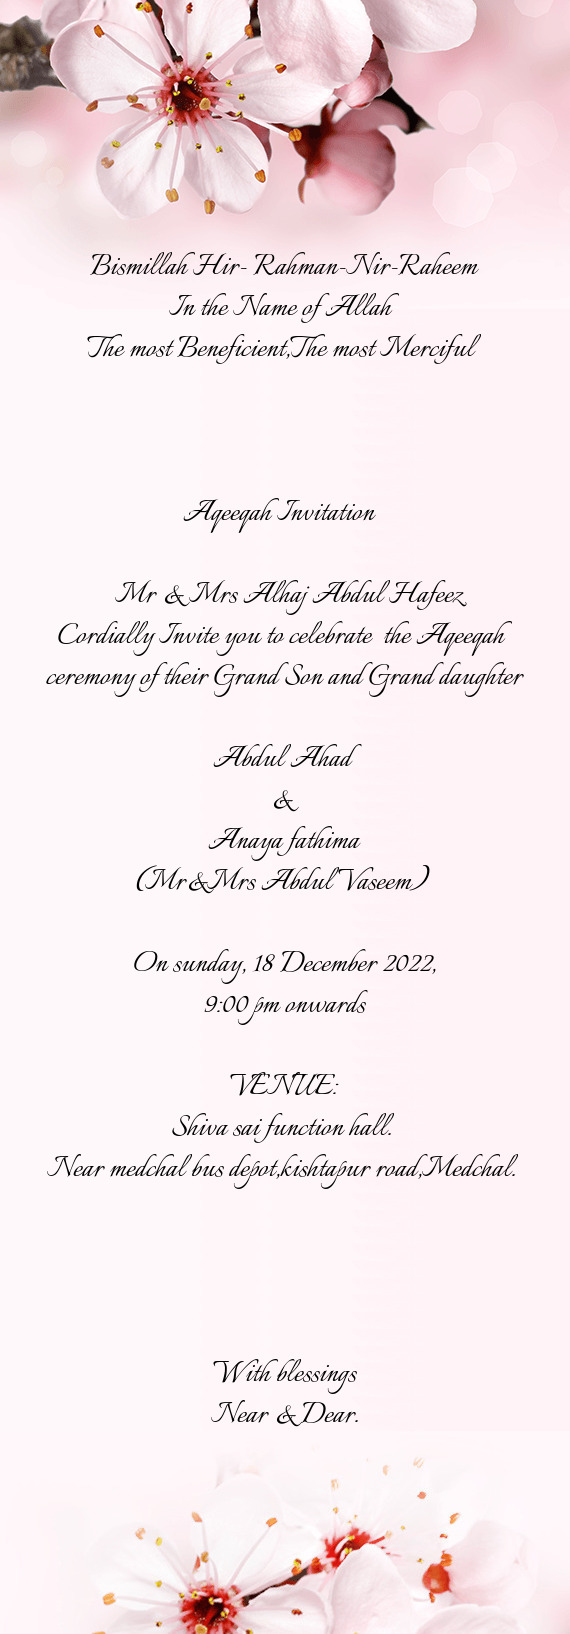 Cordially Invite you to celebrate the Aqeeqah ceremony of their Grand Son and Grand daughter